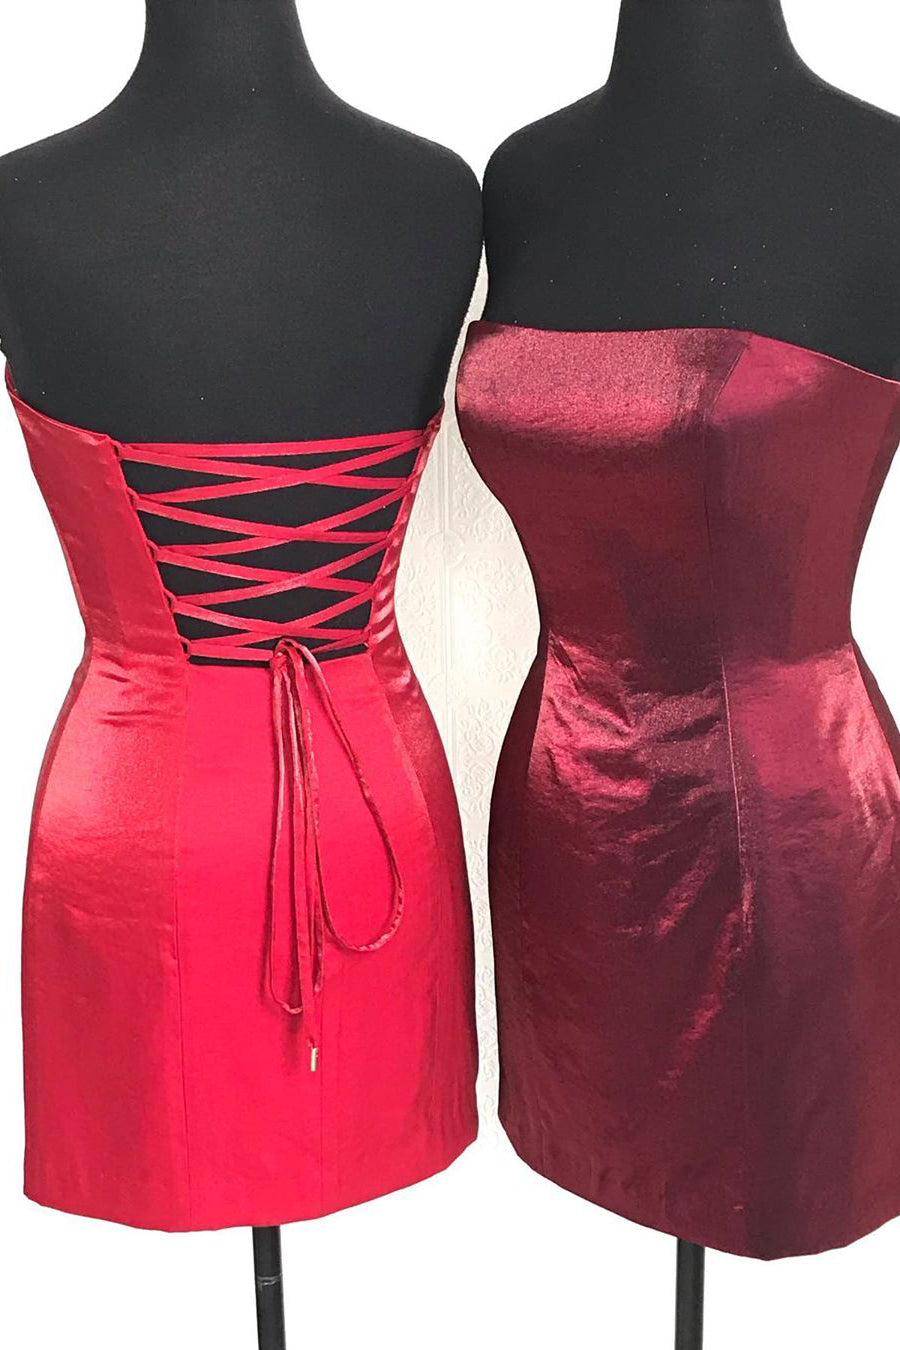 Strapless Tight Red Mini Homecoming Dress 